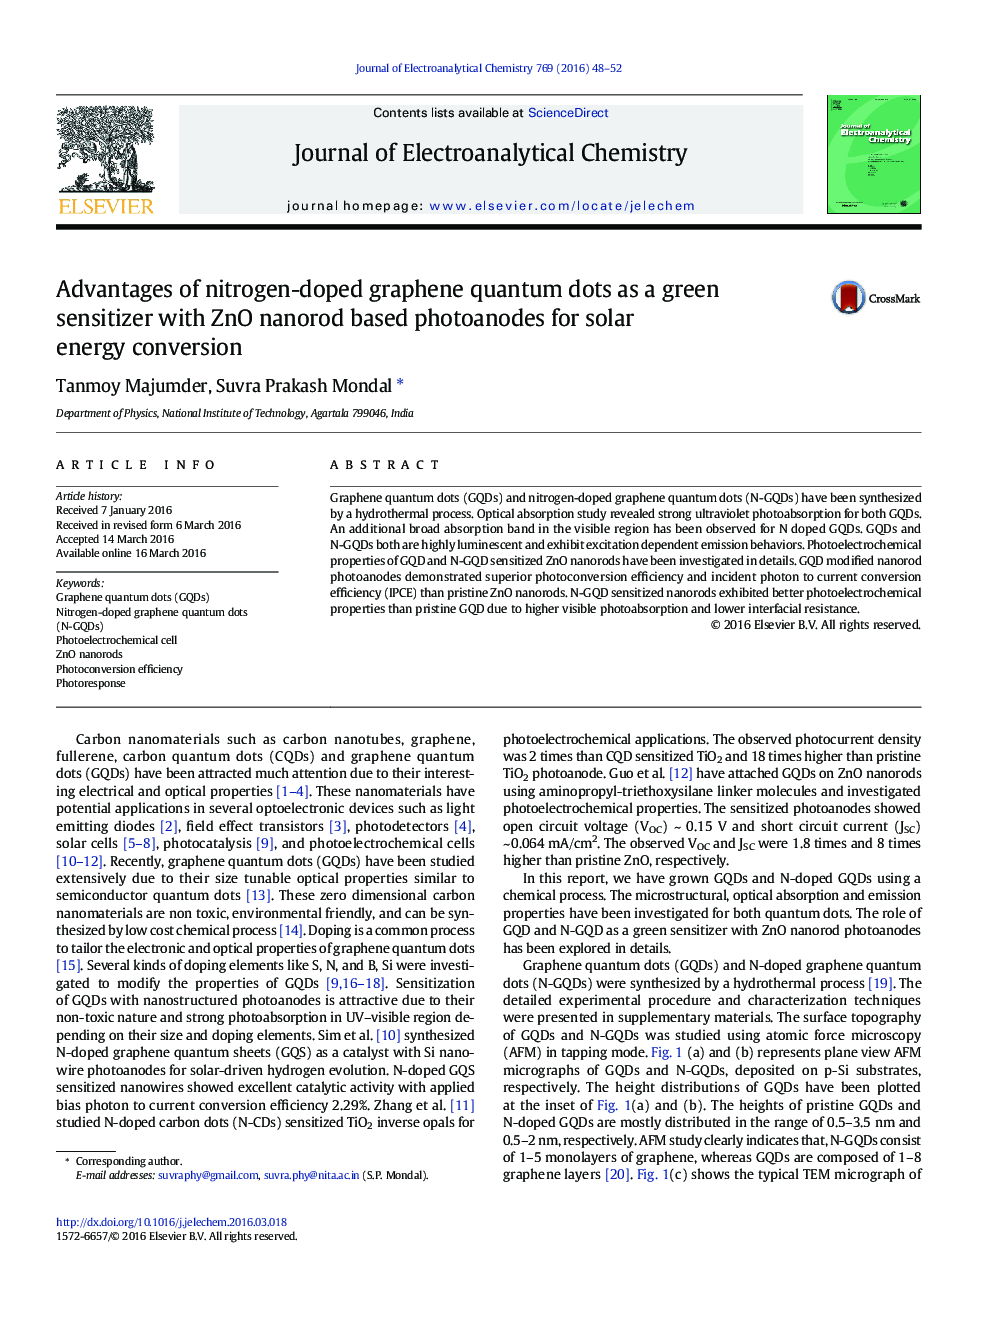 Advantages of nitrogen-doped graphene quantum dots as a green sensitizer with ZnO nanorod based photoanodes for solar energy conversion